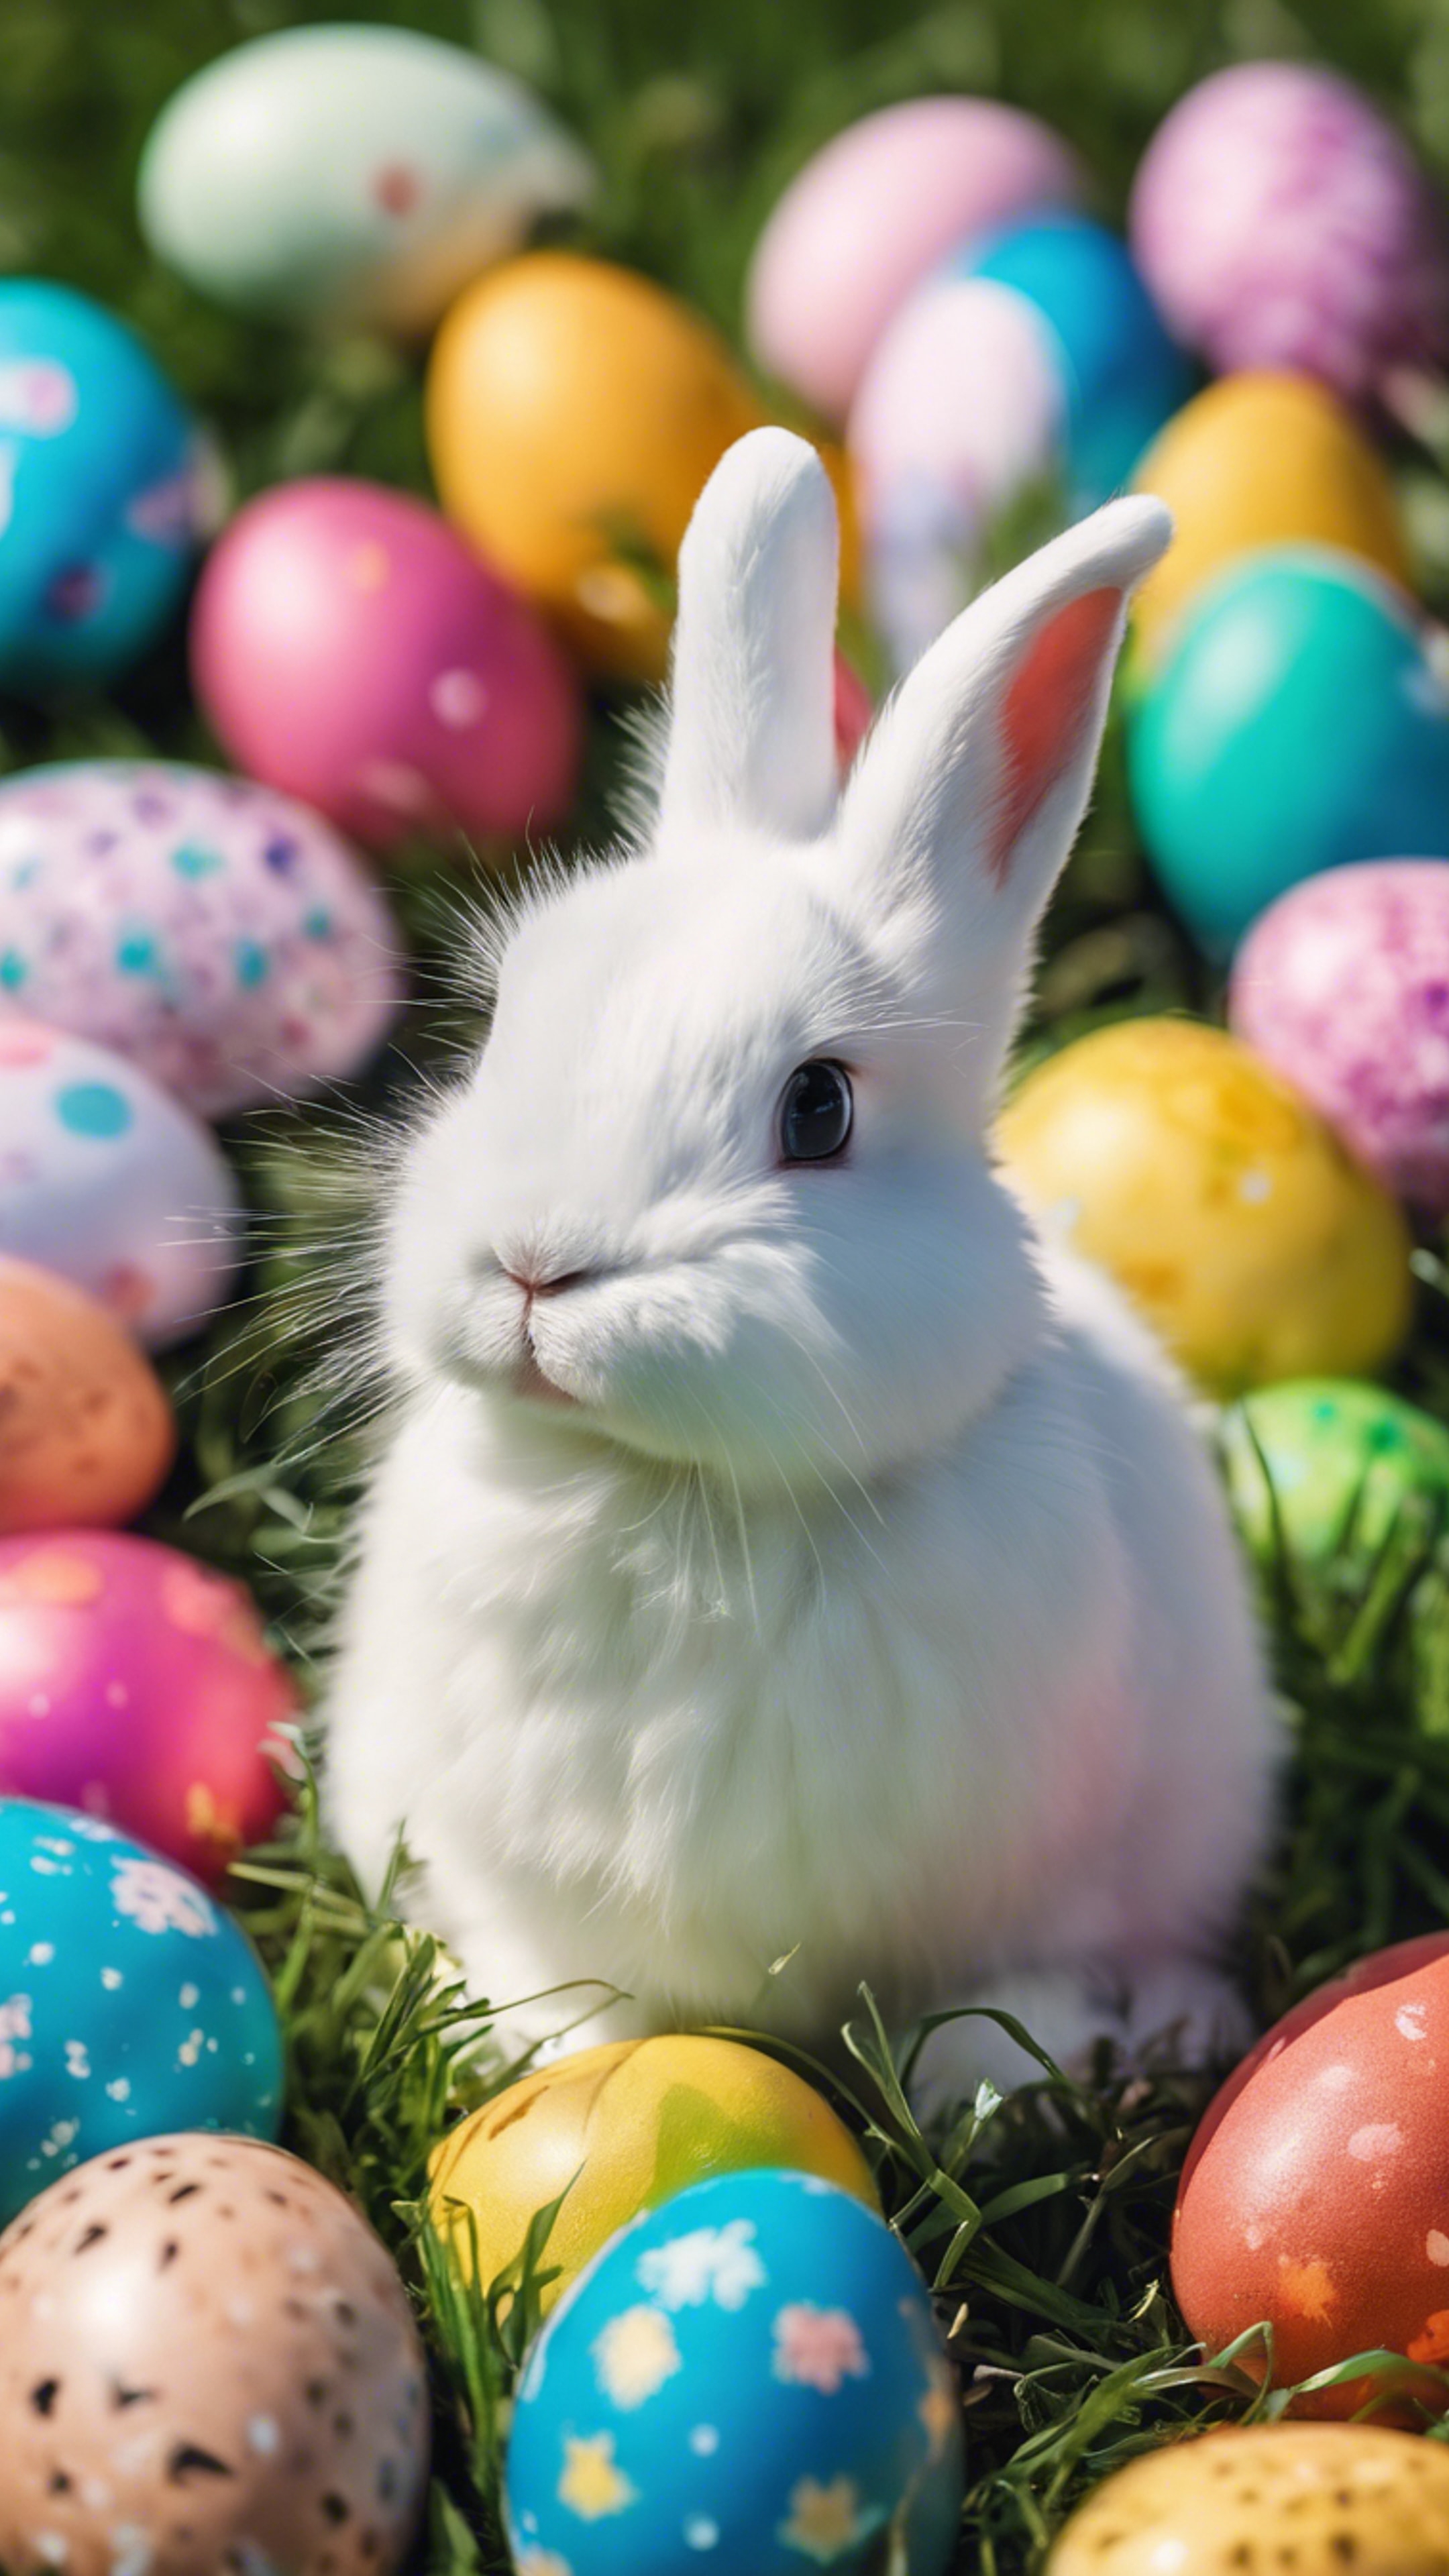 A group of fluffy rabbits surrounded by colorful Easter eggs in a sunny meadow. Wallpaper[da4f773d6ea74733b4fe]